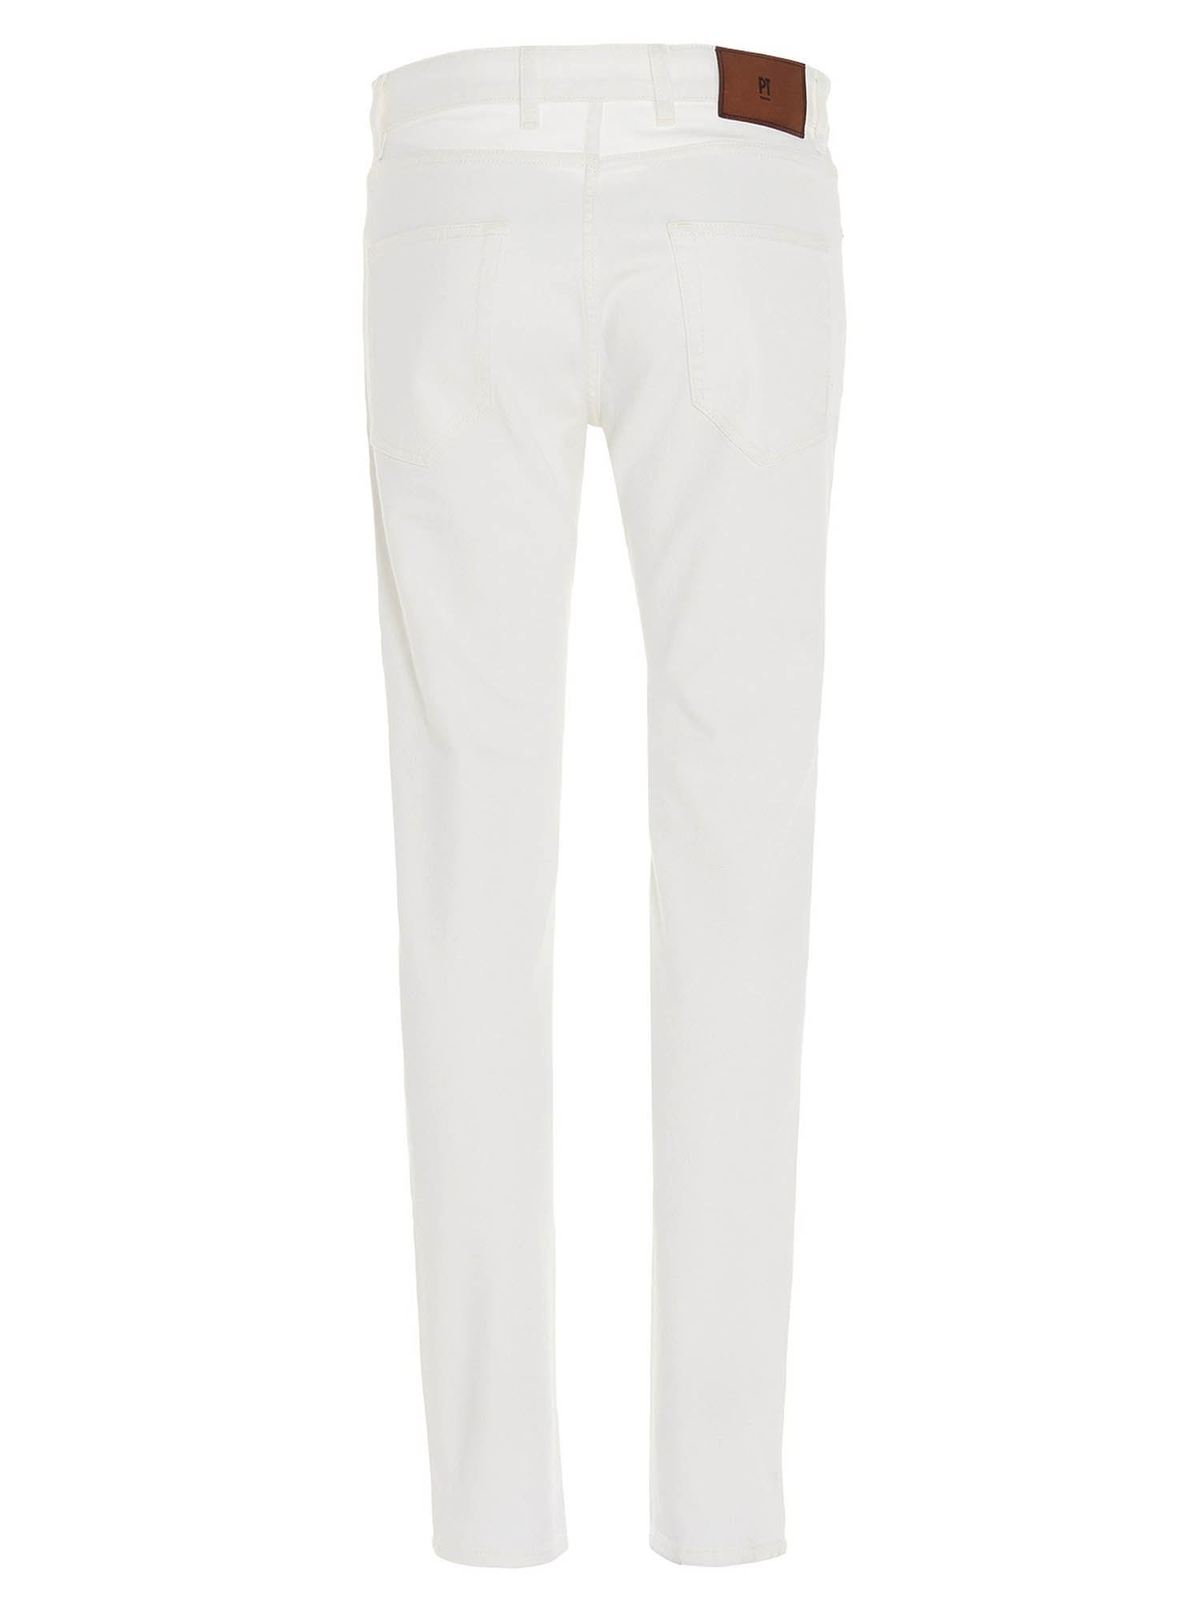 Shop Pt Torino Must Rock Jeans In White